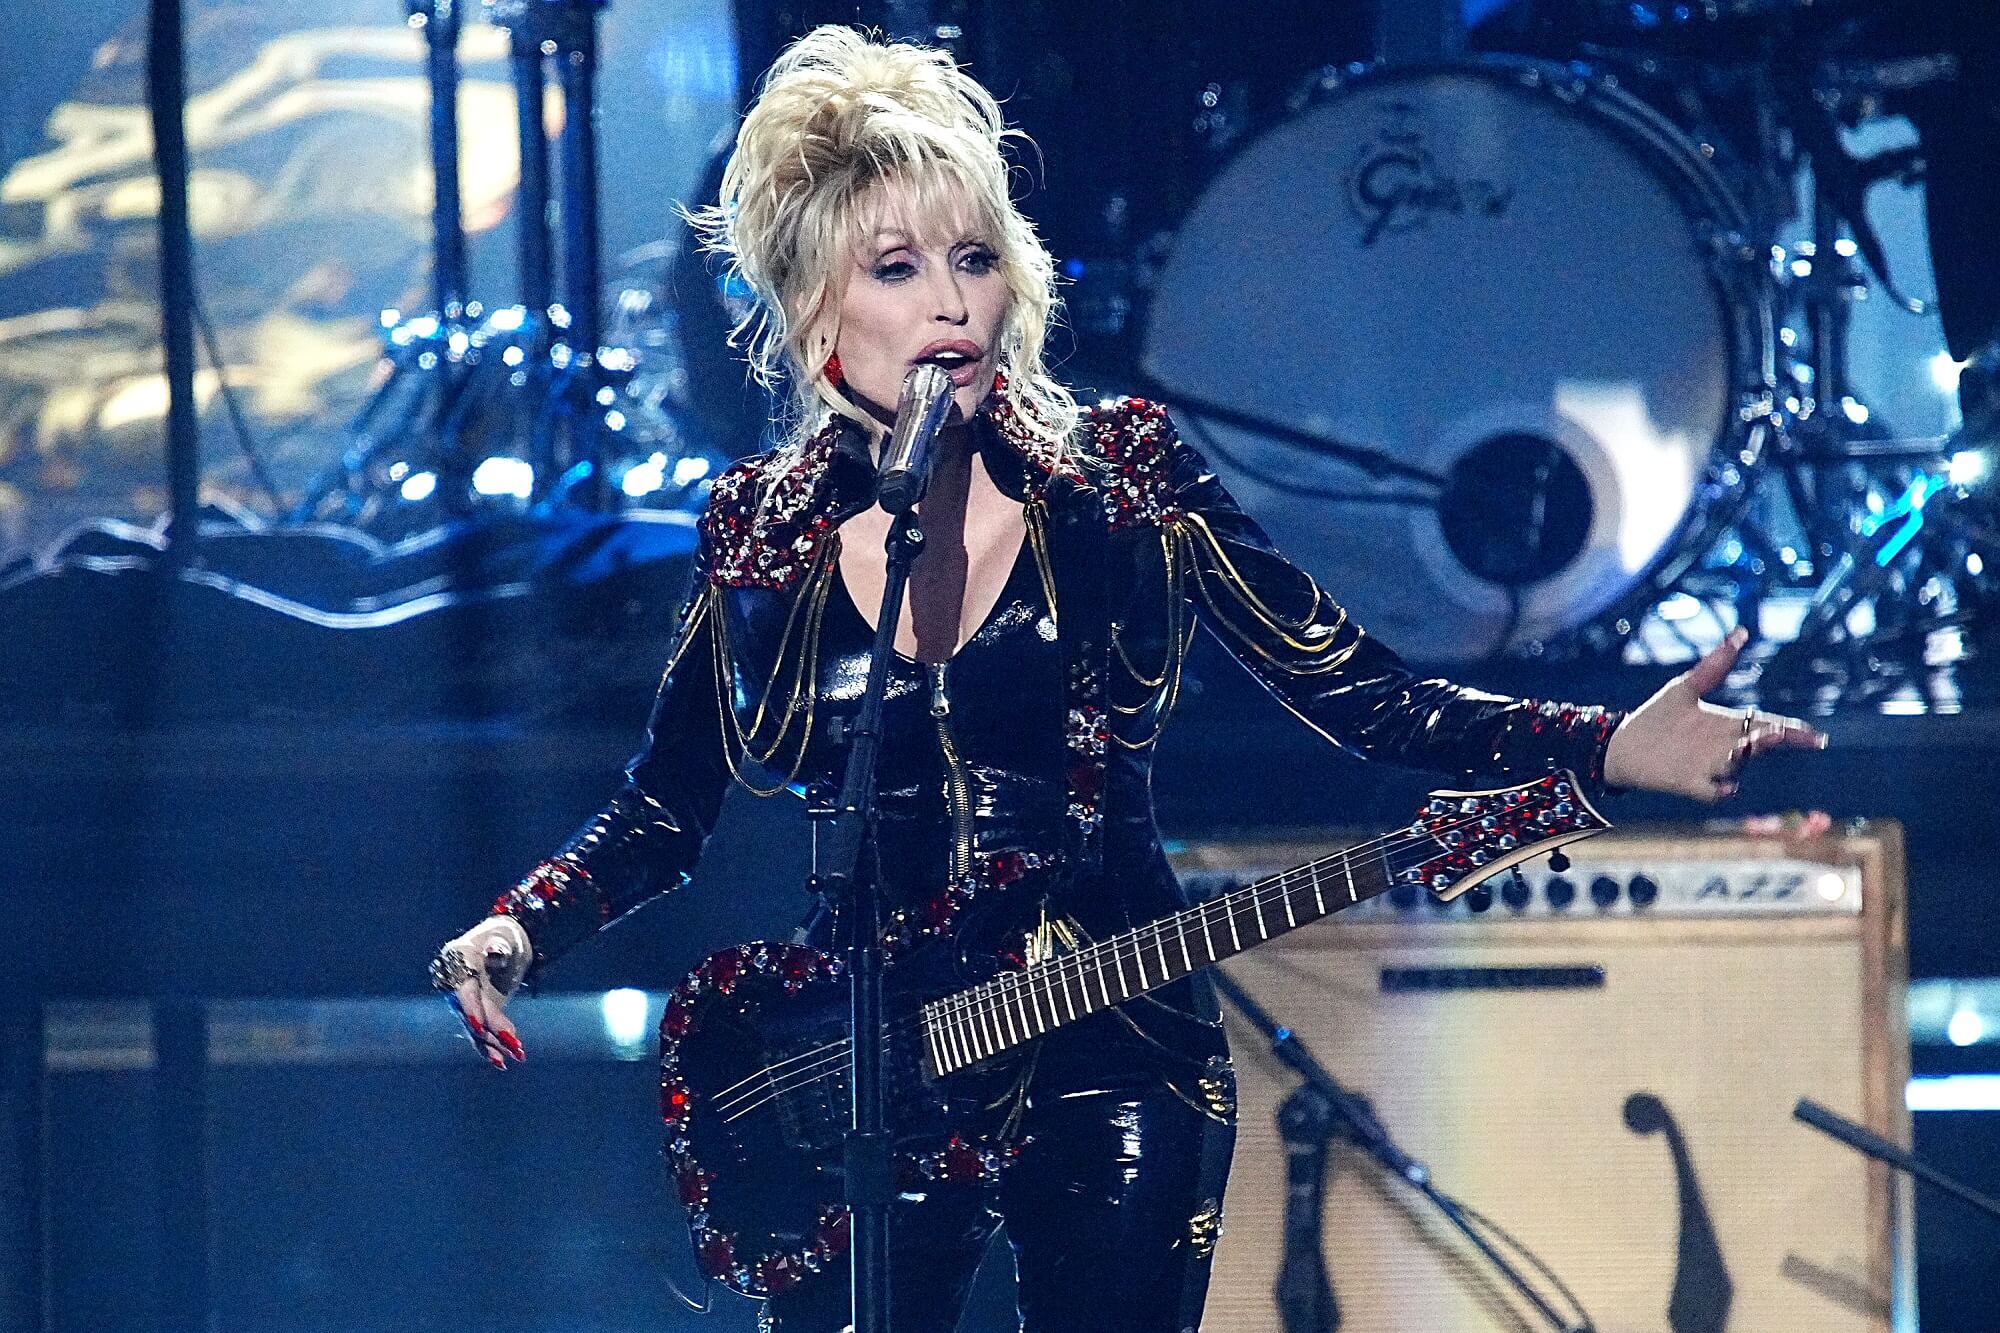 Dolly Parton stands on stage in a black leather outfit with a back guitar